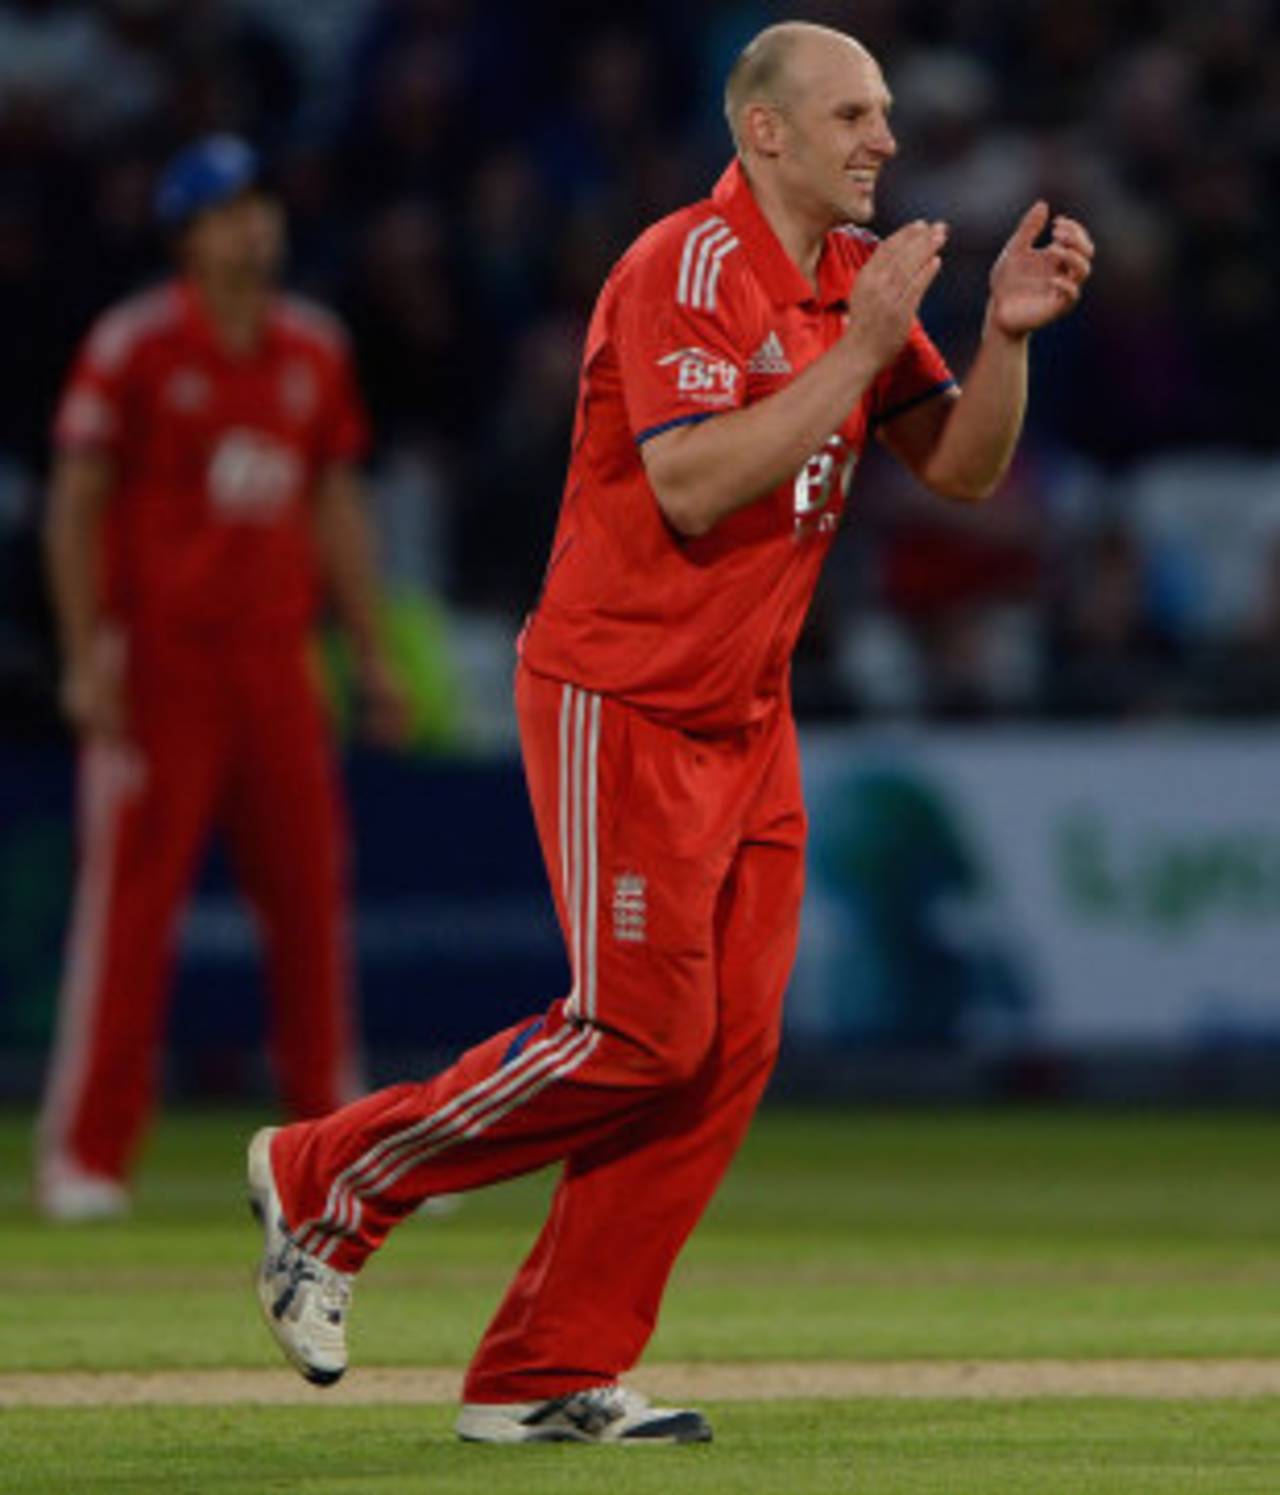 James Tredwell has performed well for England in ODIs this year but was taken on by the Australians at Old Trafford&nbsp;&nbsp;&bull;&nbsp;&nbsp;Getty Images